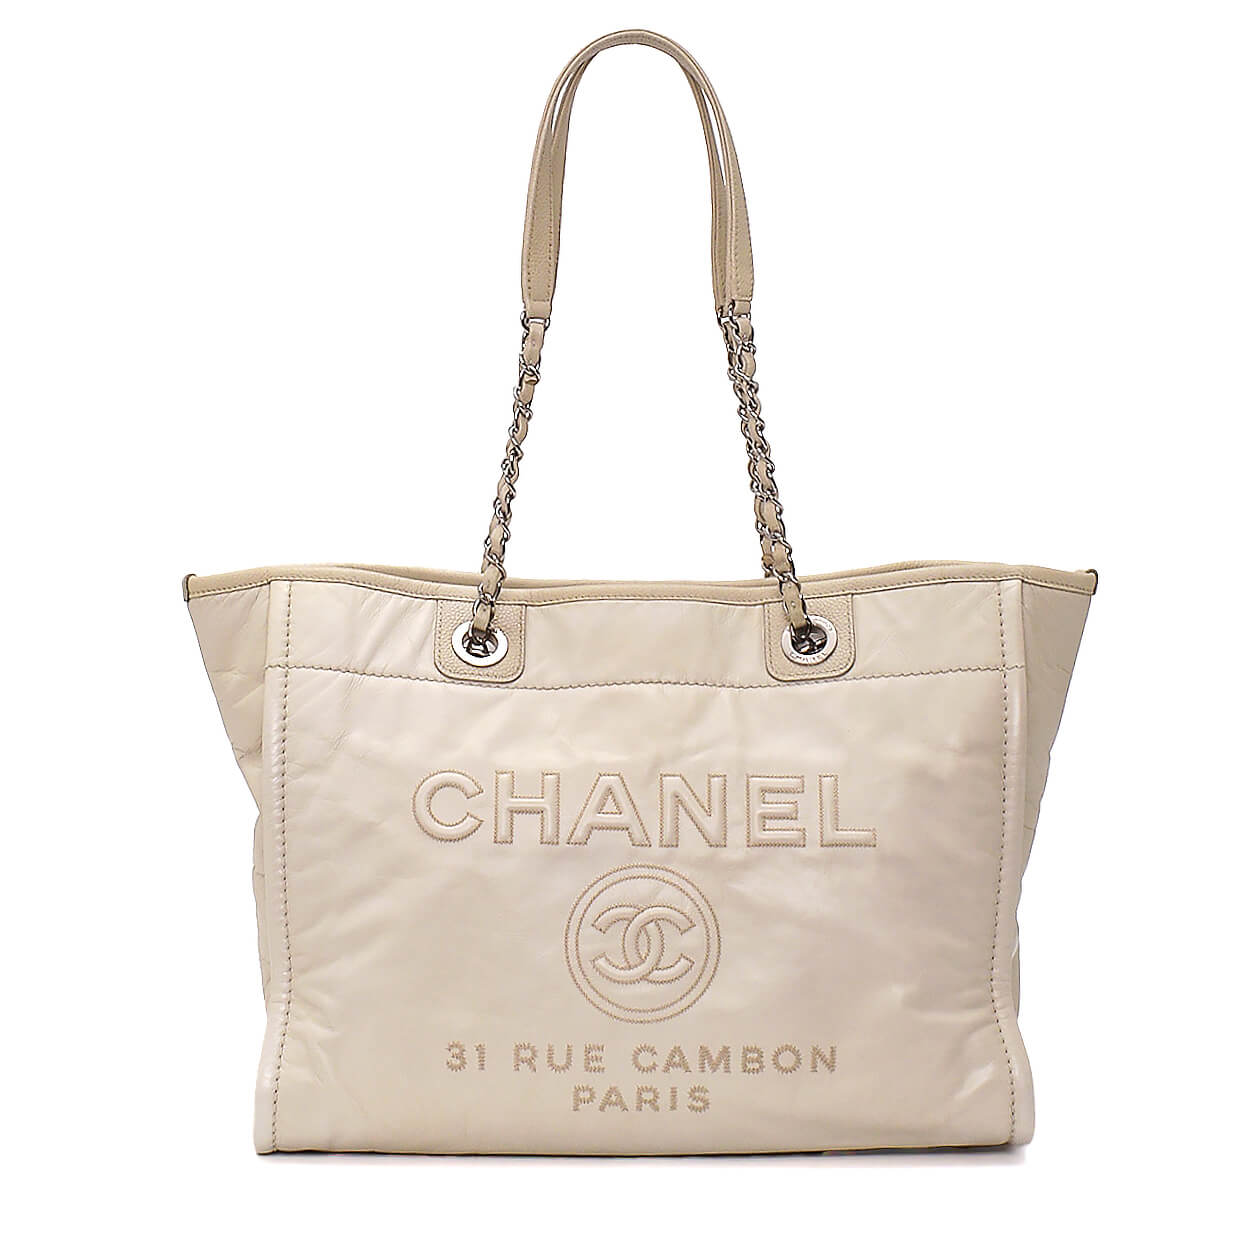 Chanel - White Leather Deauville Bag